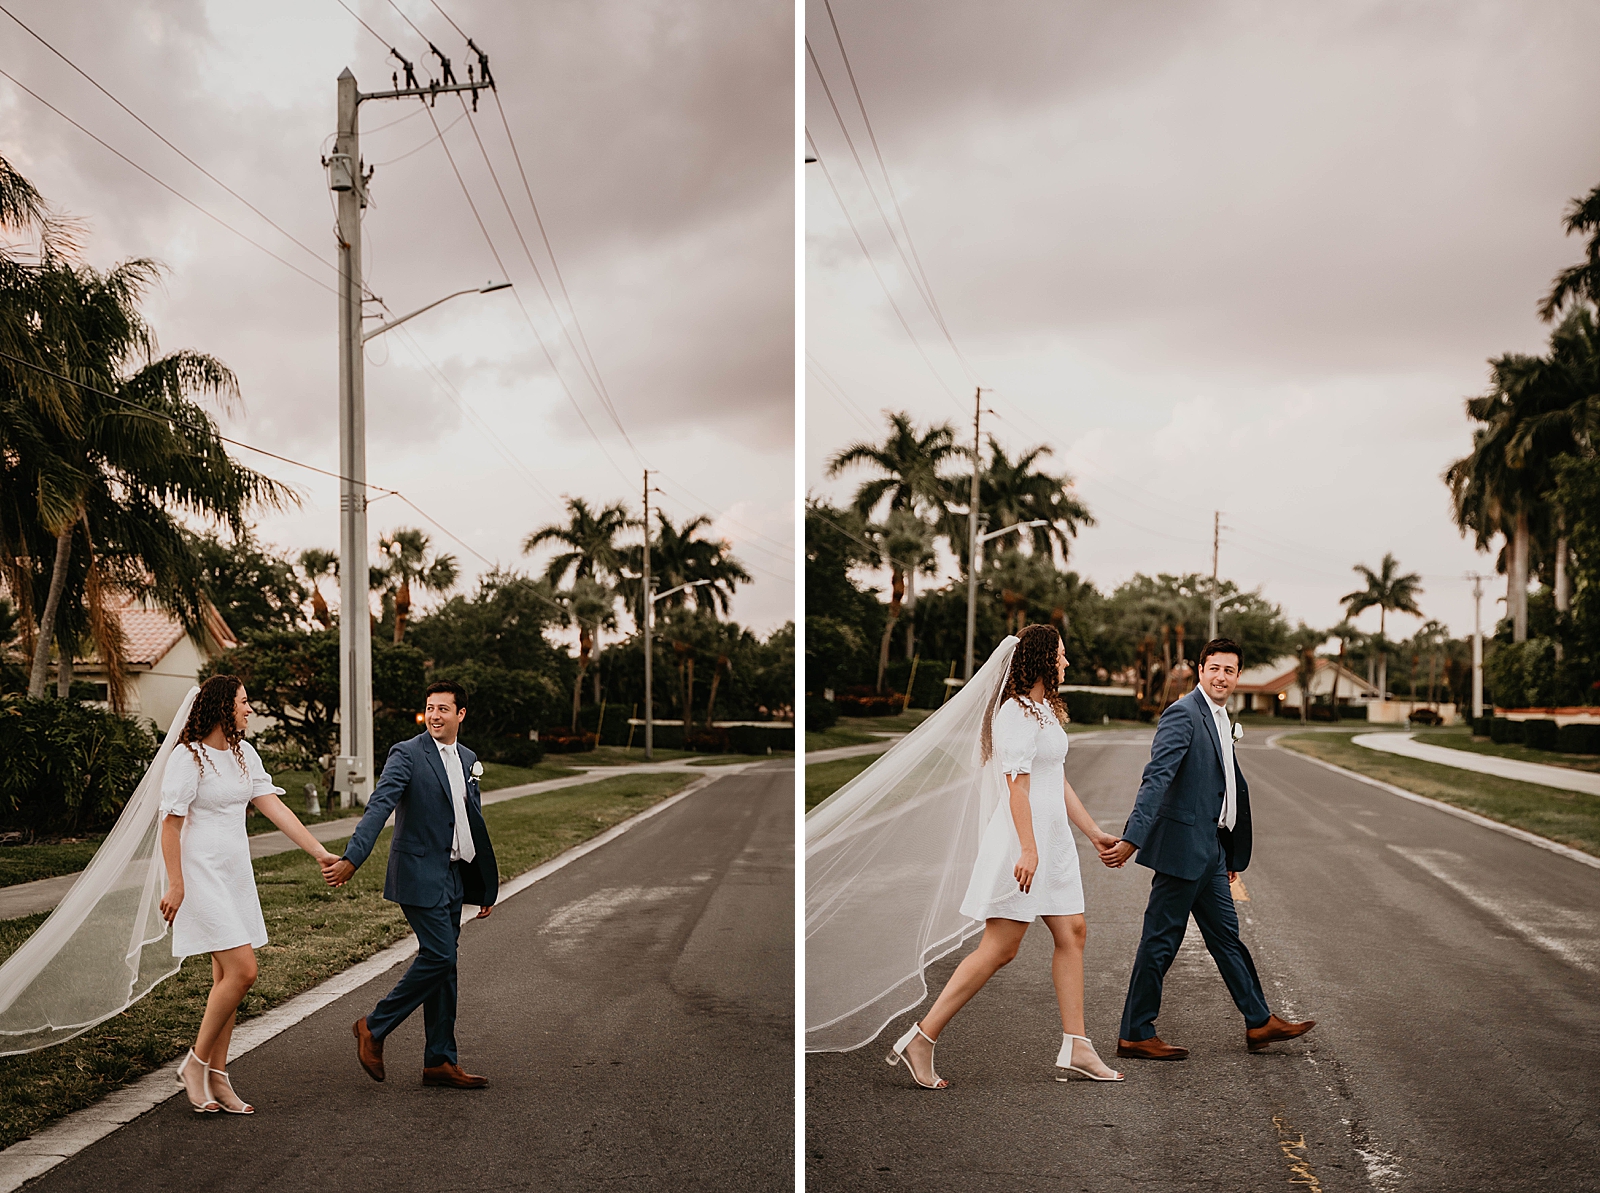 Bride and Groom holding hands and crossing the street together Intimate South Florida Wedding Photography captured by South Florida Wedding Photographer Krystal Capone Photography 